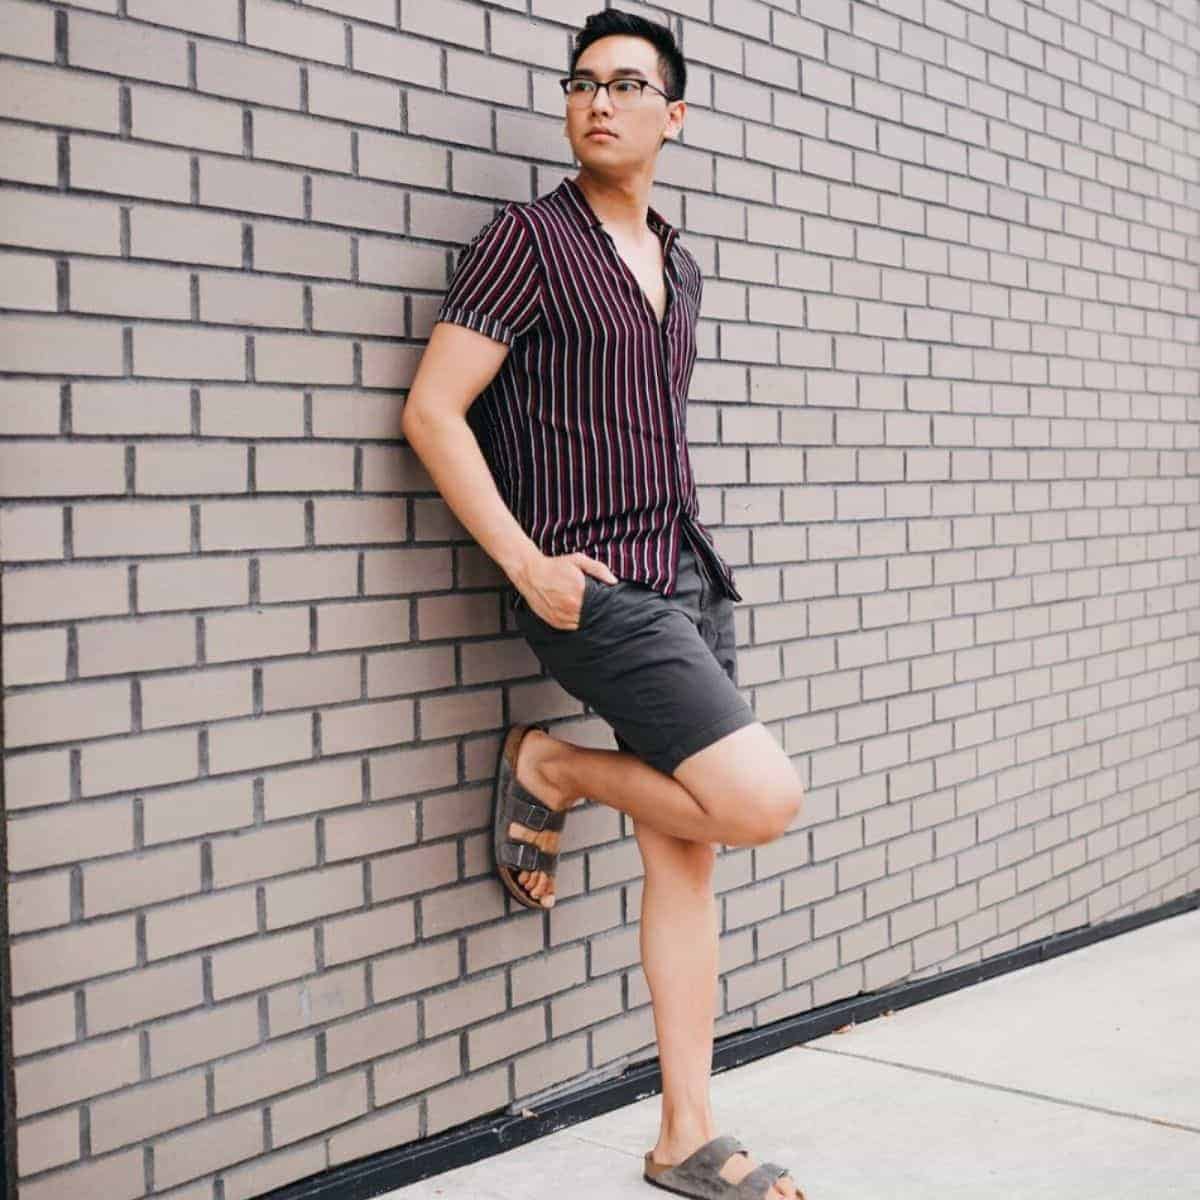 Person wearing shorts and leaning against a brick wall.